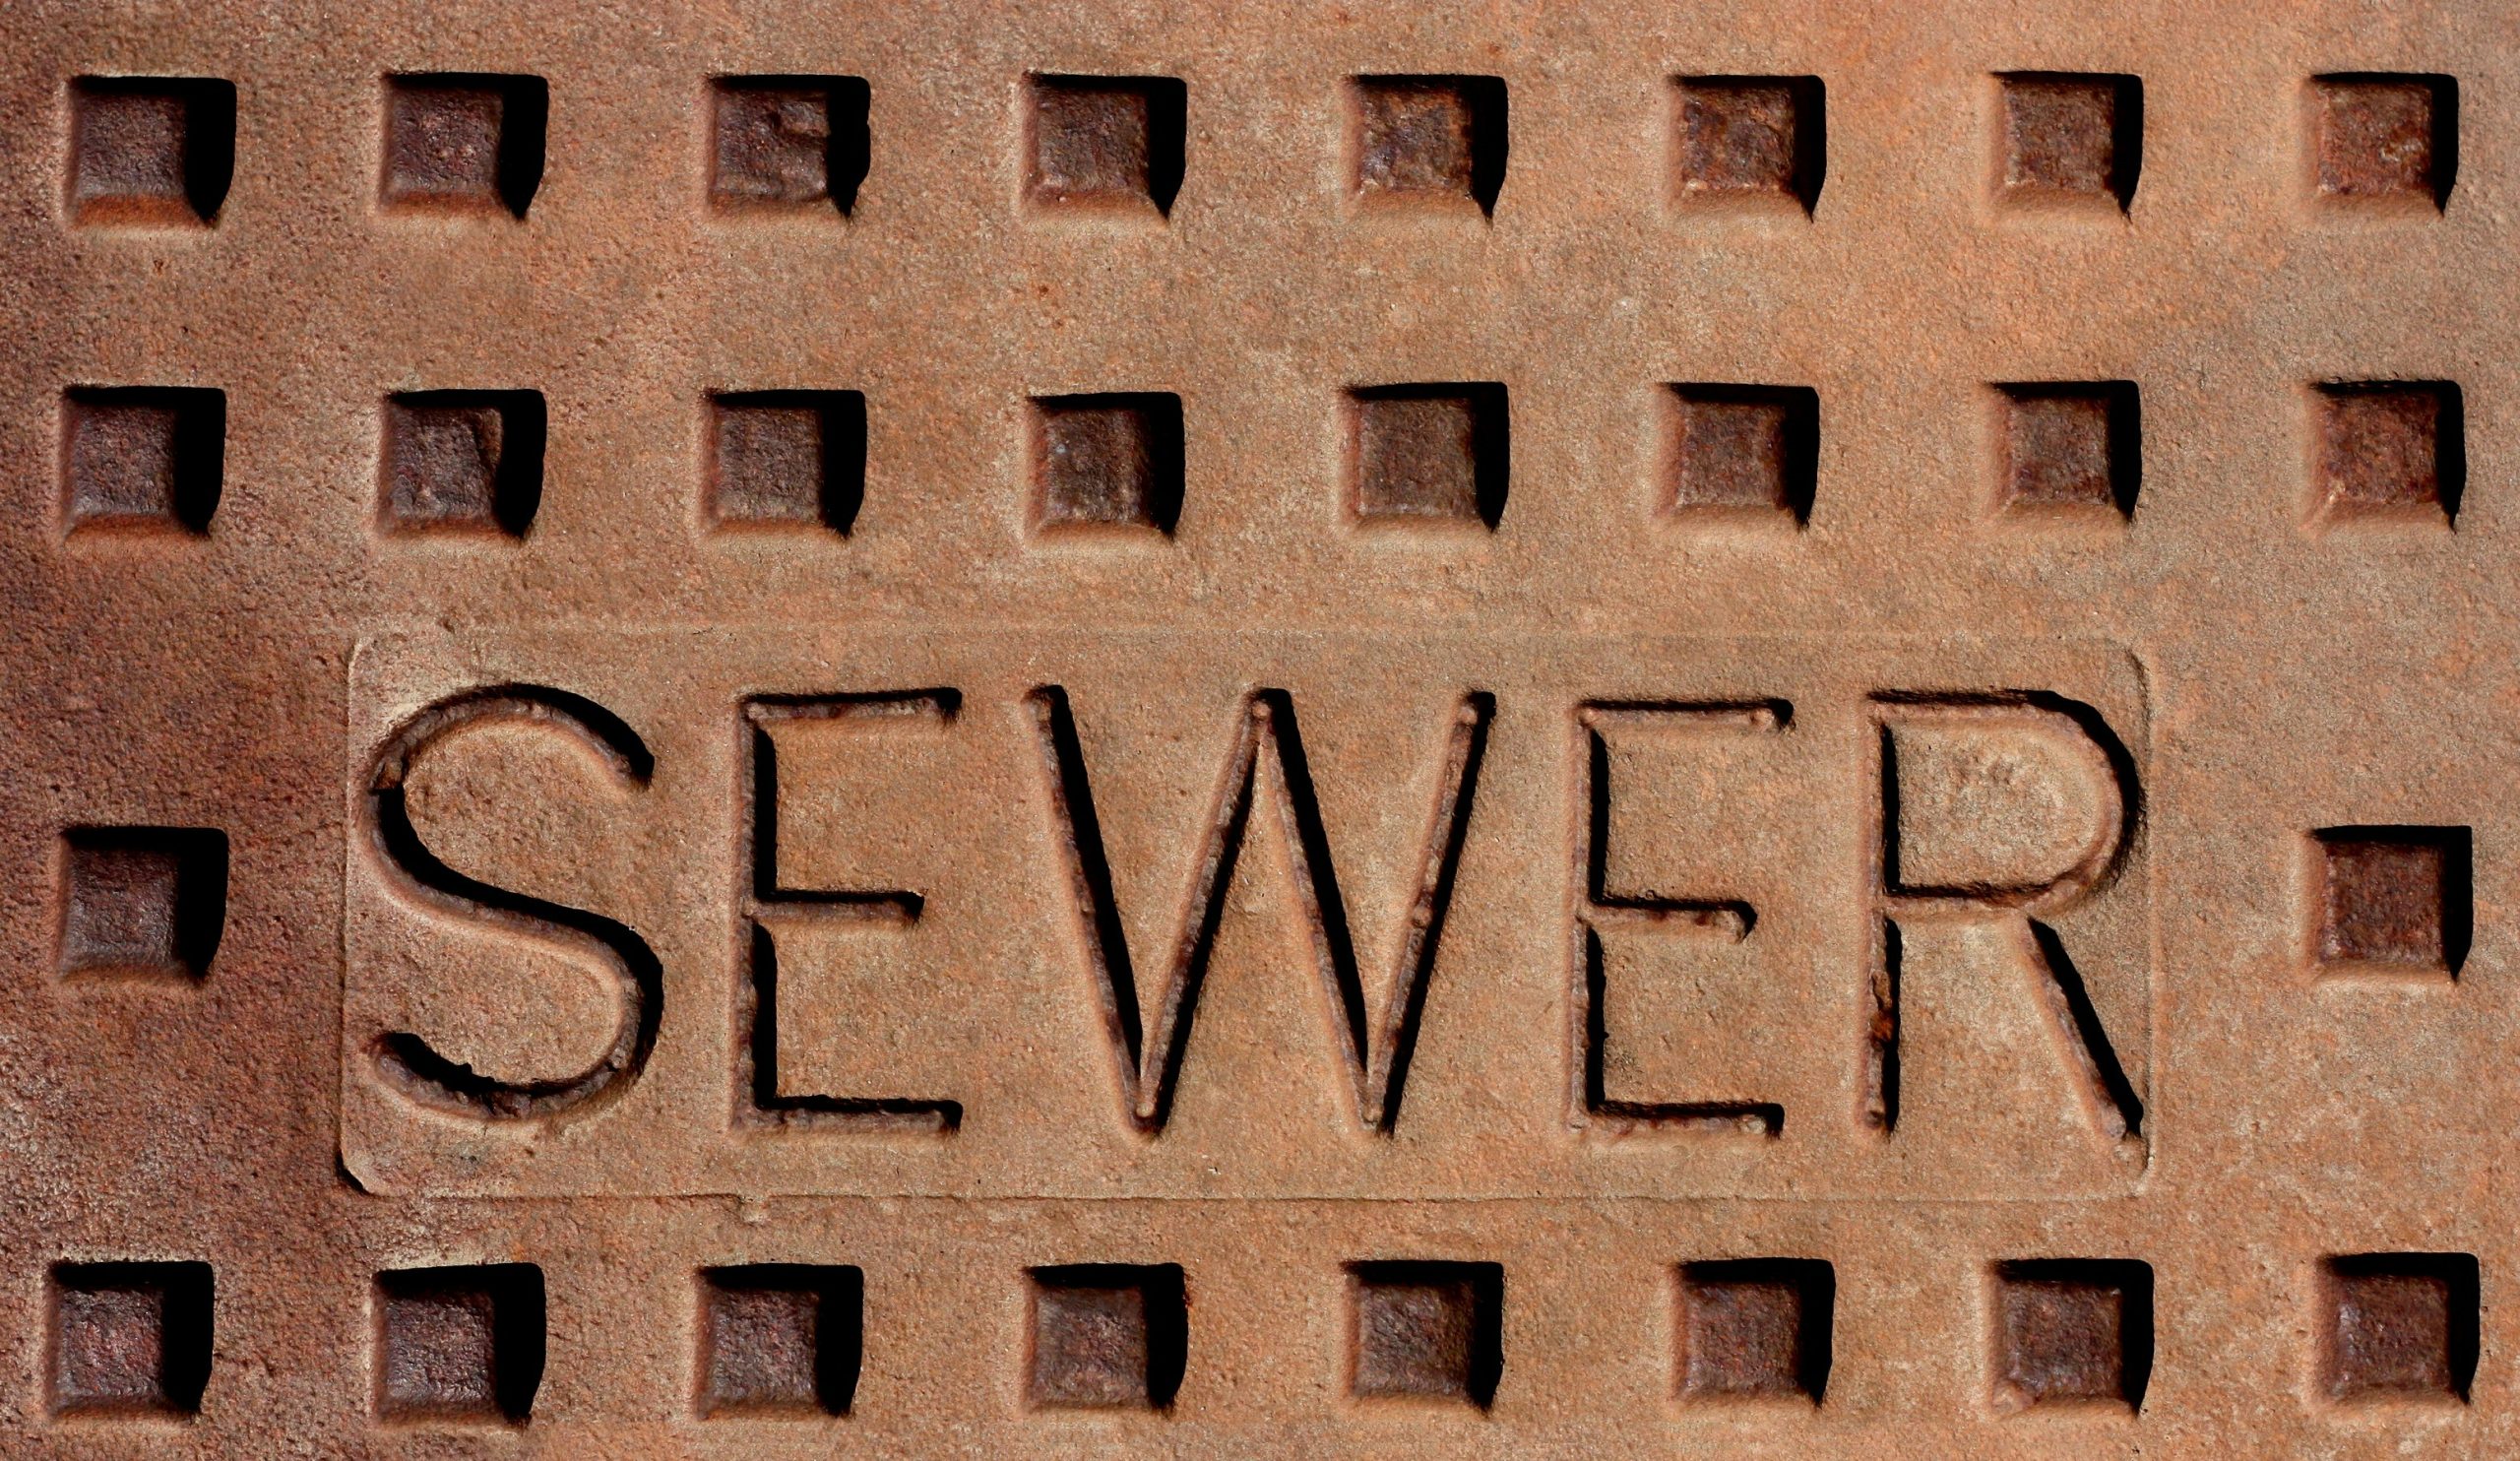 How to tell if sewer line is broken